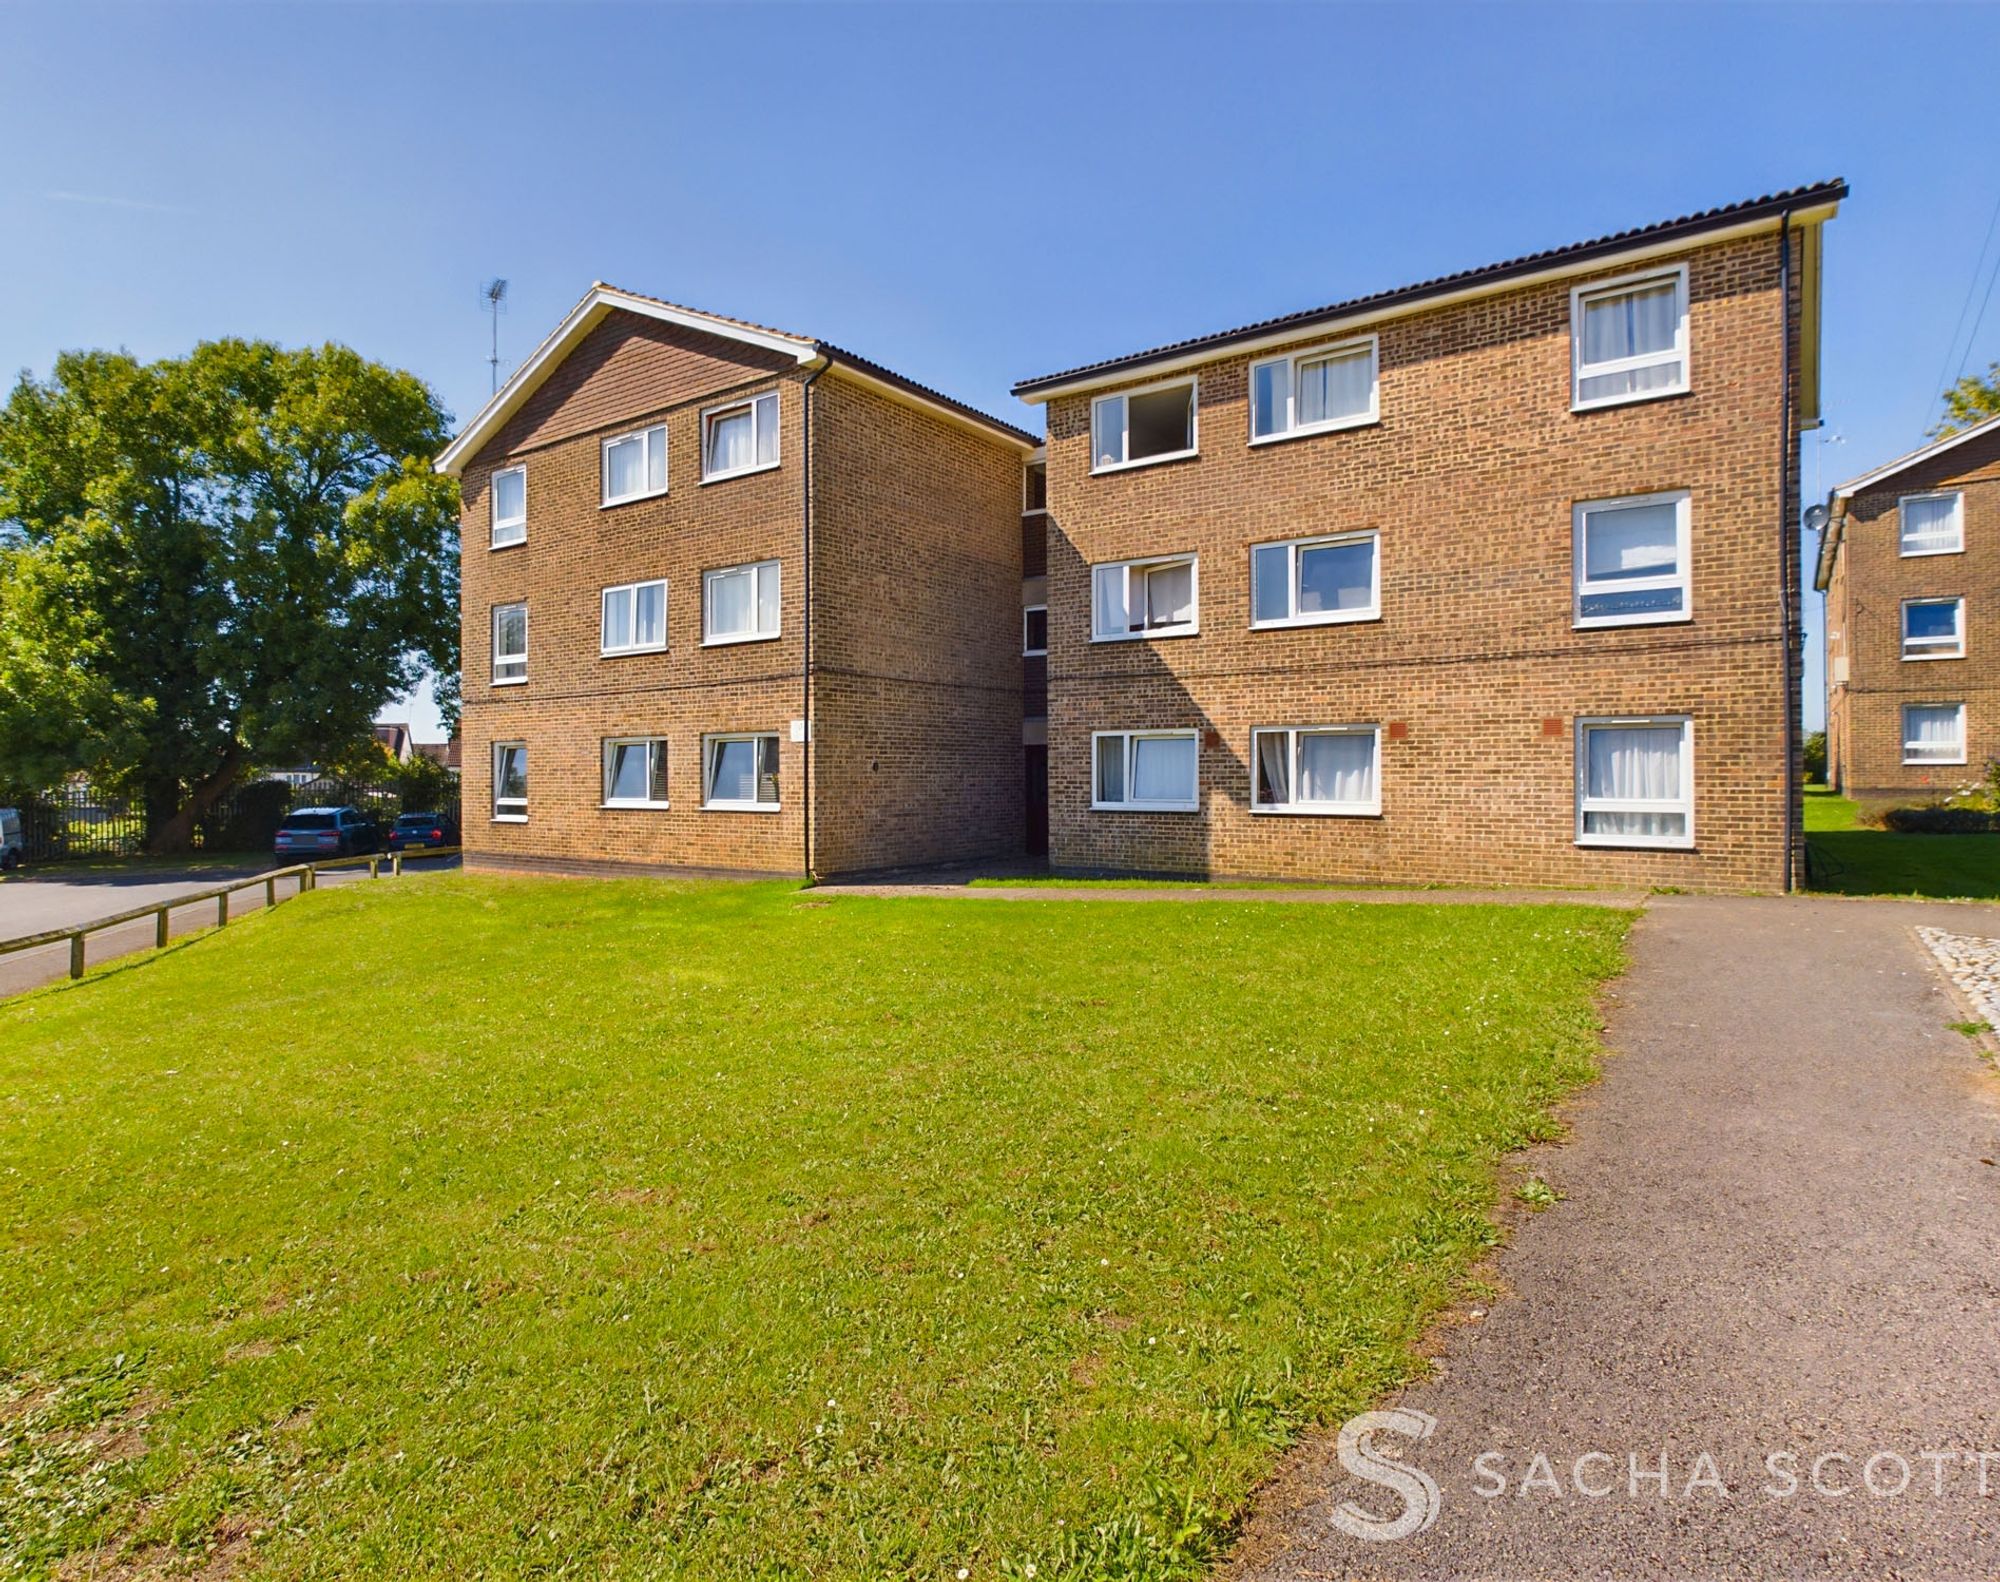 2 bed ground floor flat for sale in Watermead, Tadworth - Property Image 1